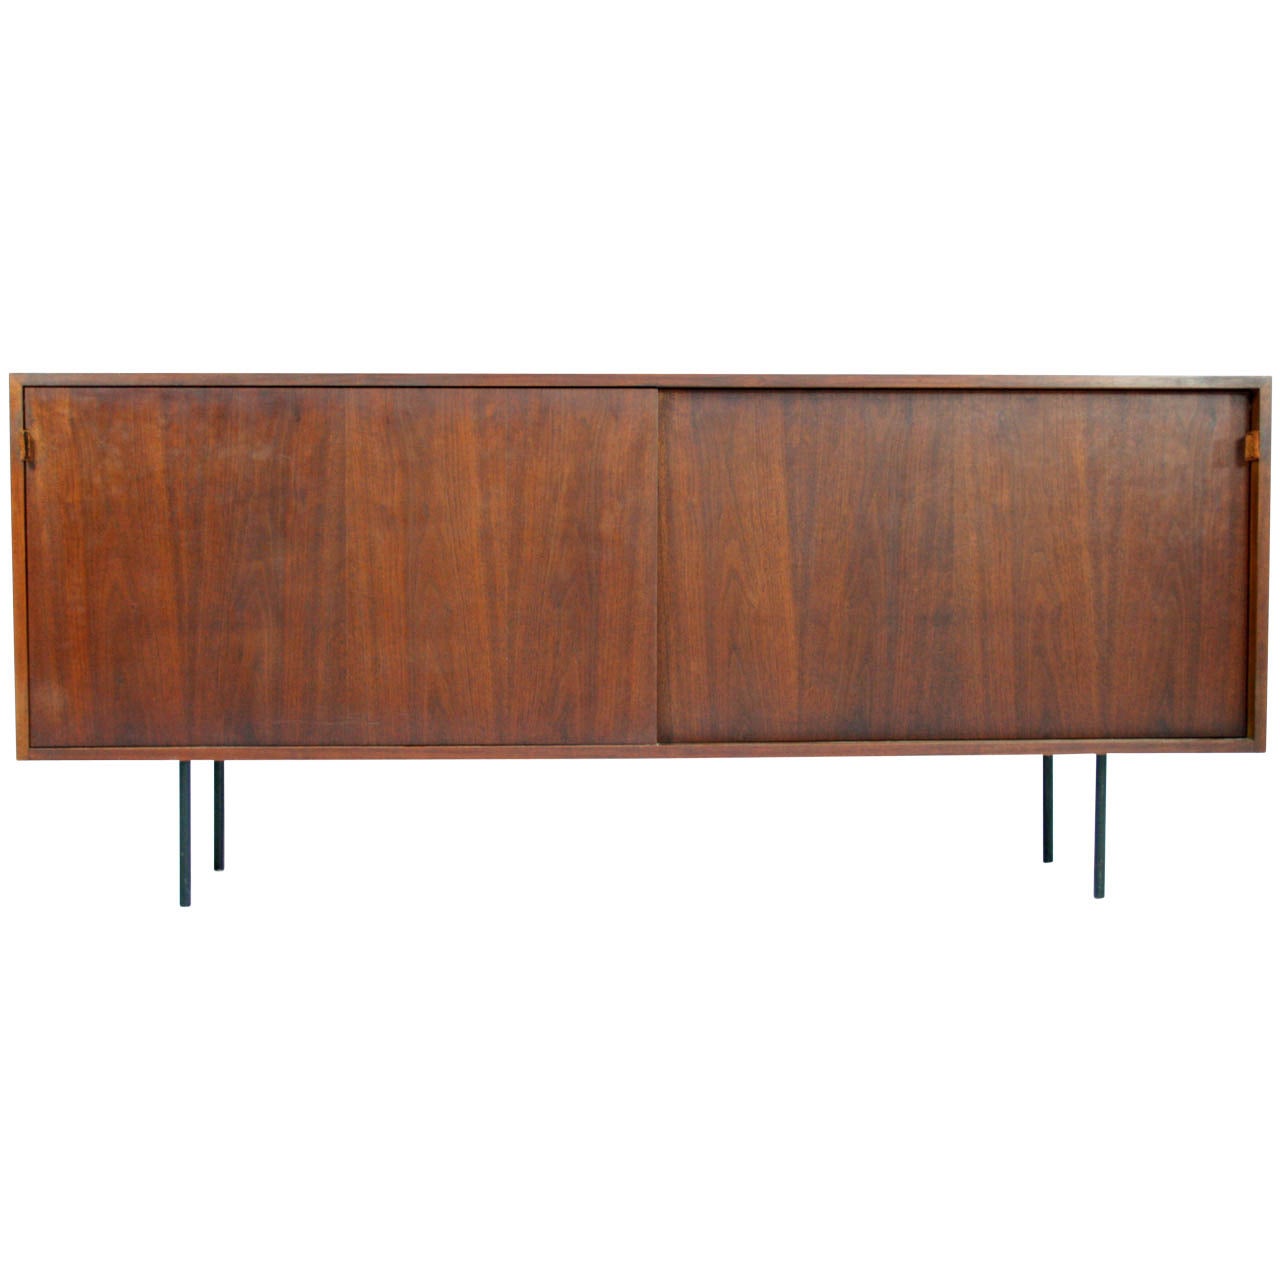 Early Florence Knoll Model 116 Walnut Credenza